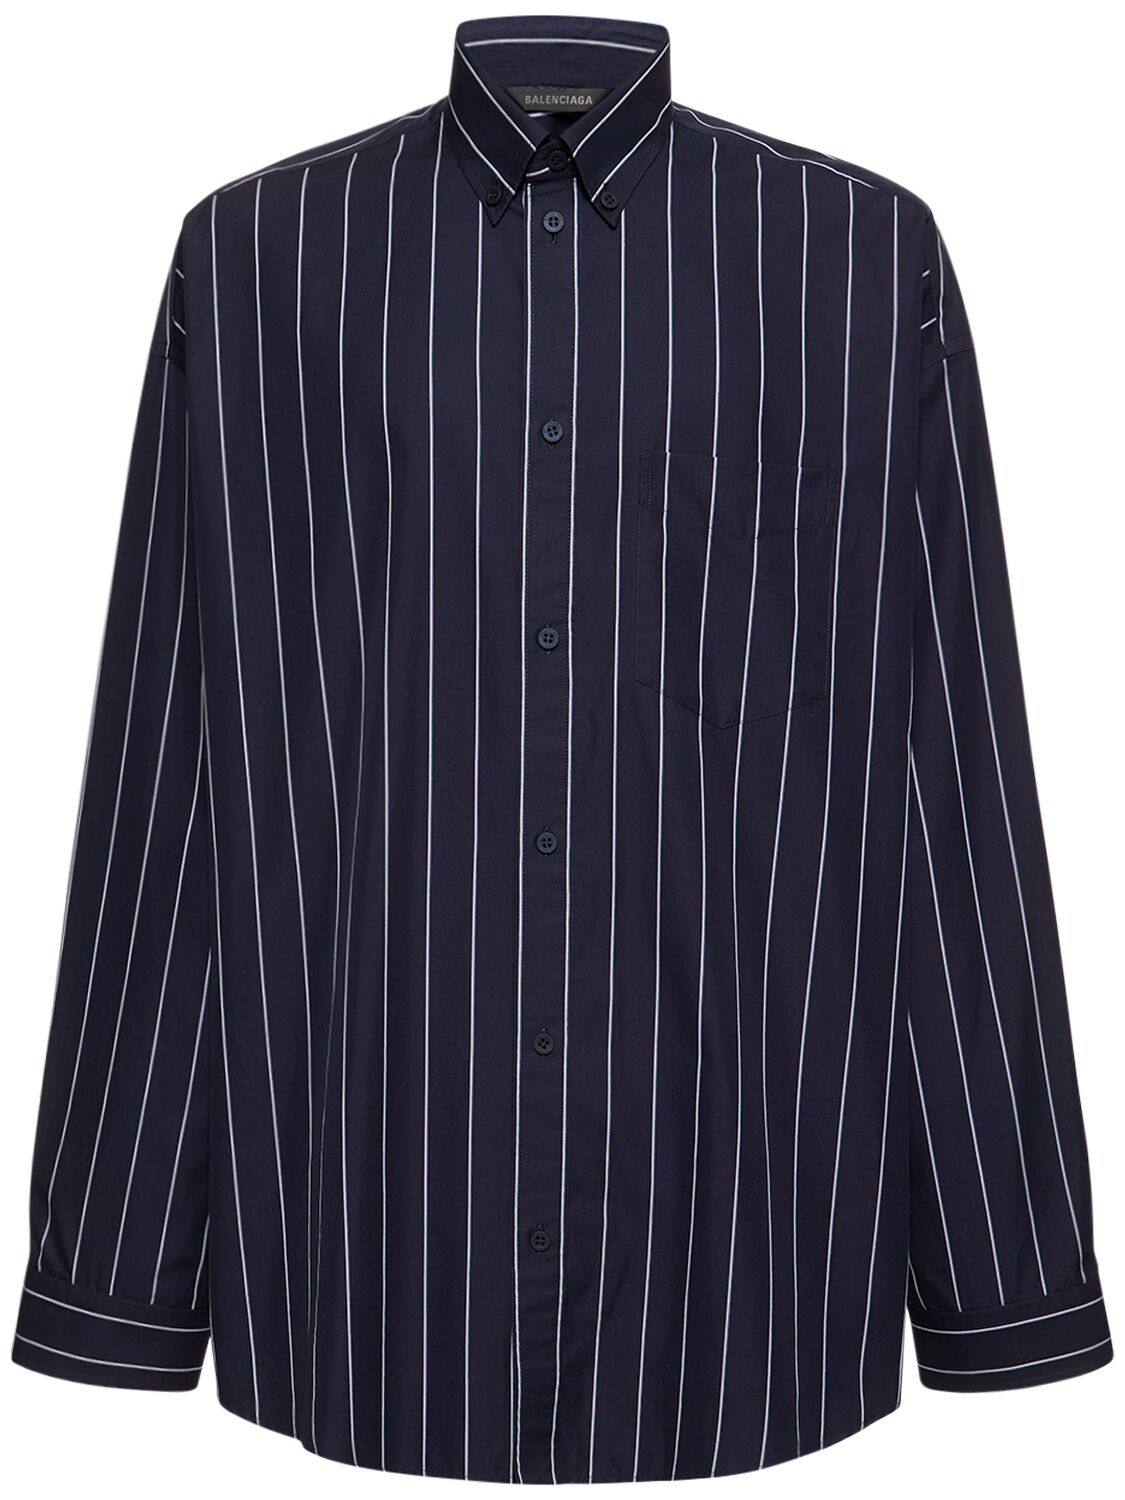 Image of Striped Oversized Cotton Blend Shirt